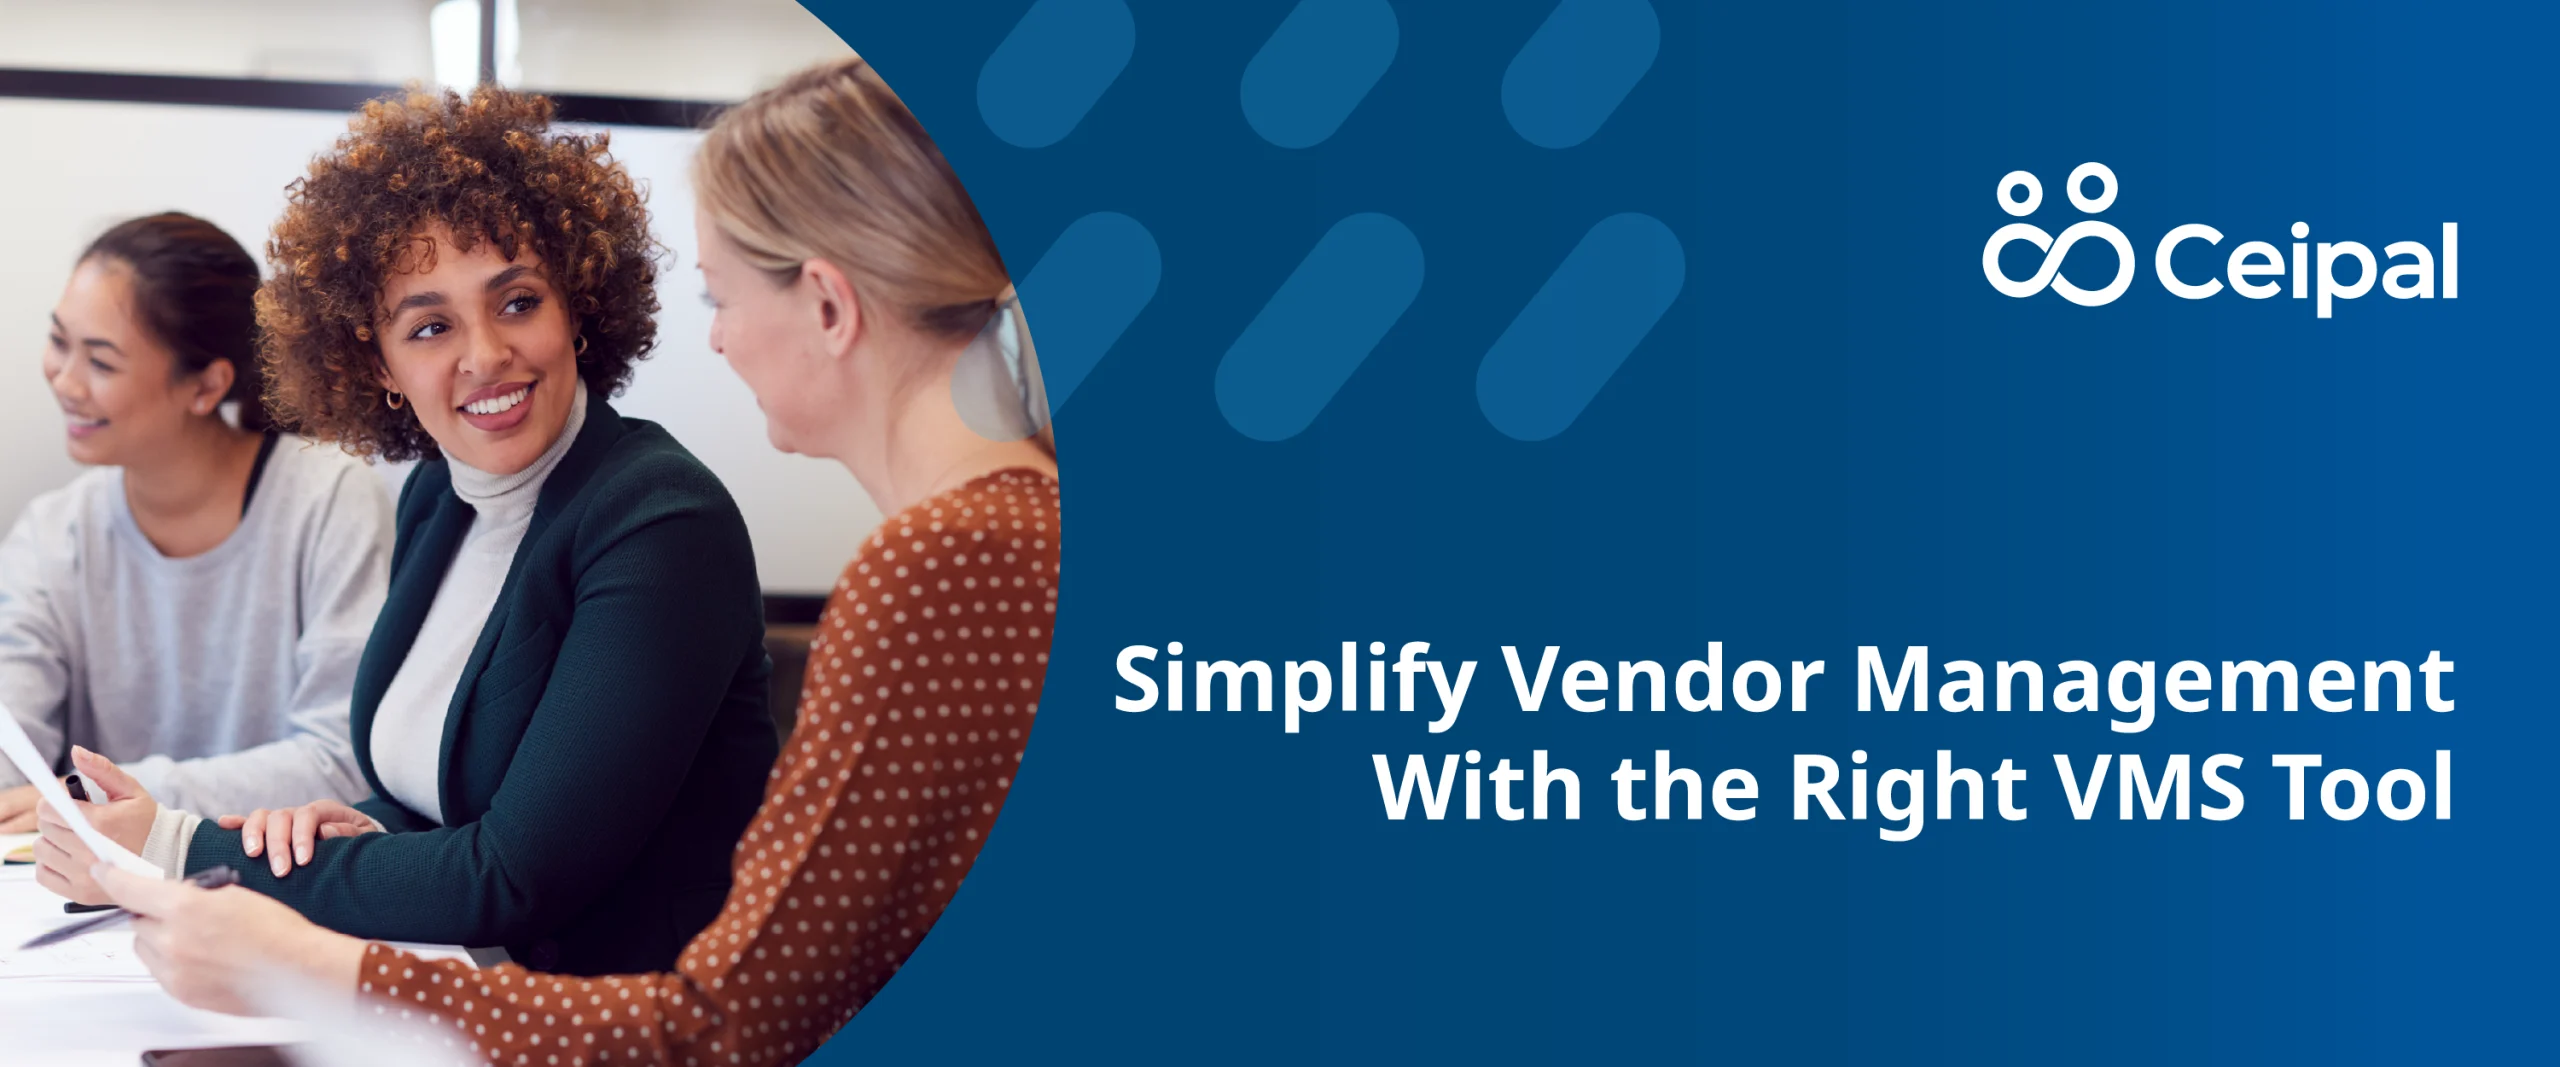 Simplify Vendor Management With the Right VMS Tool